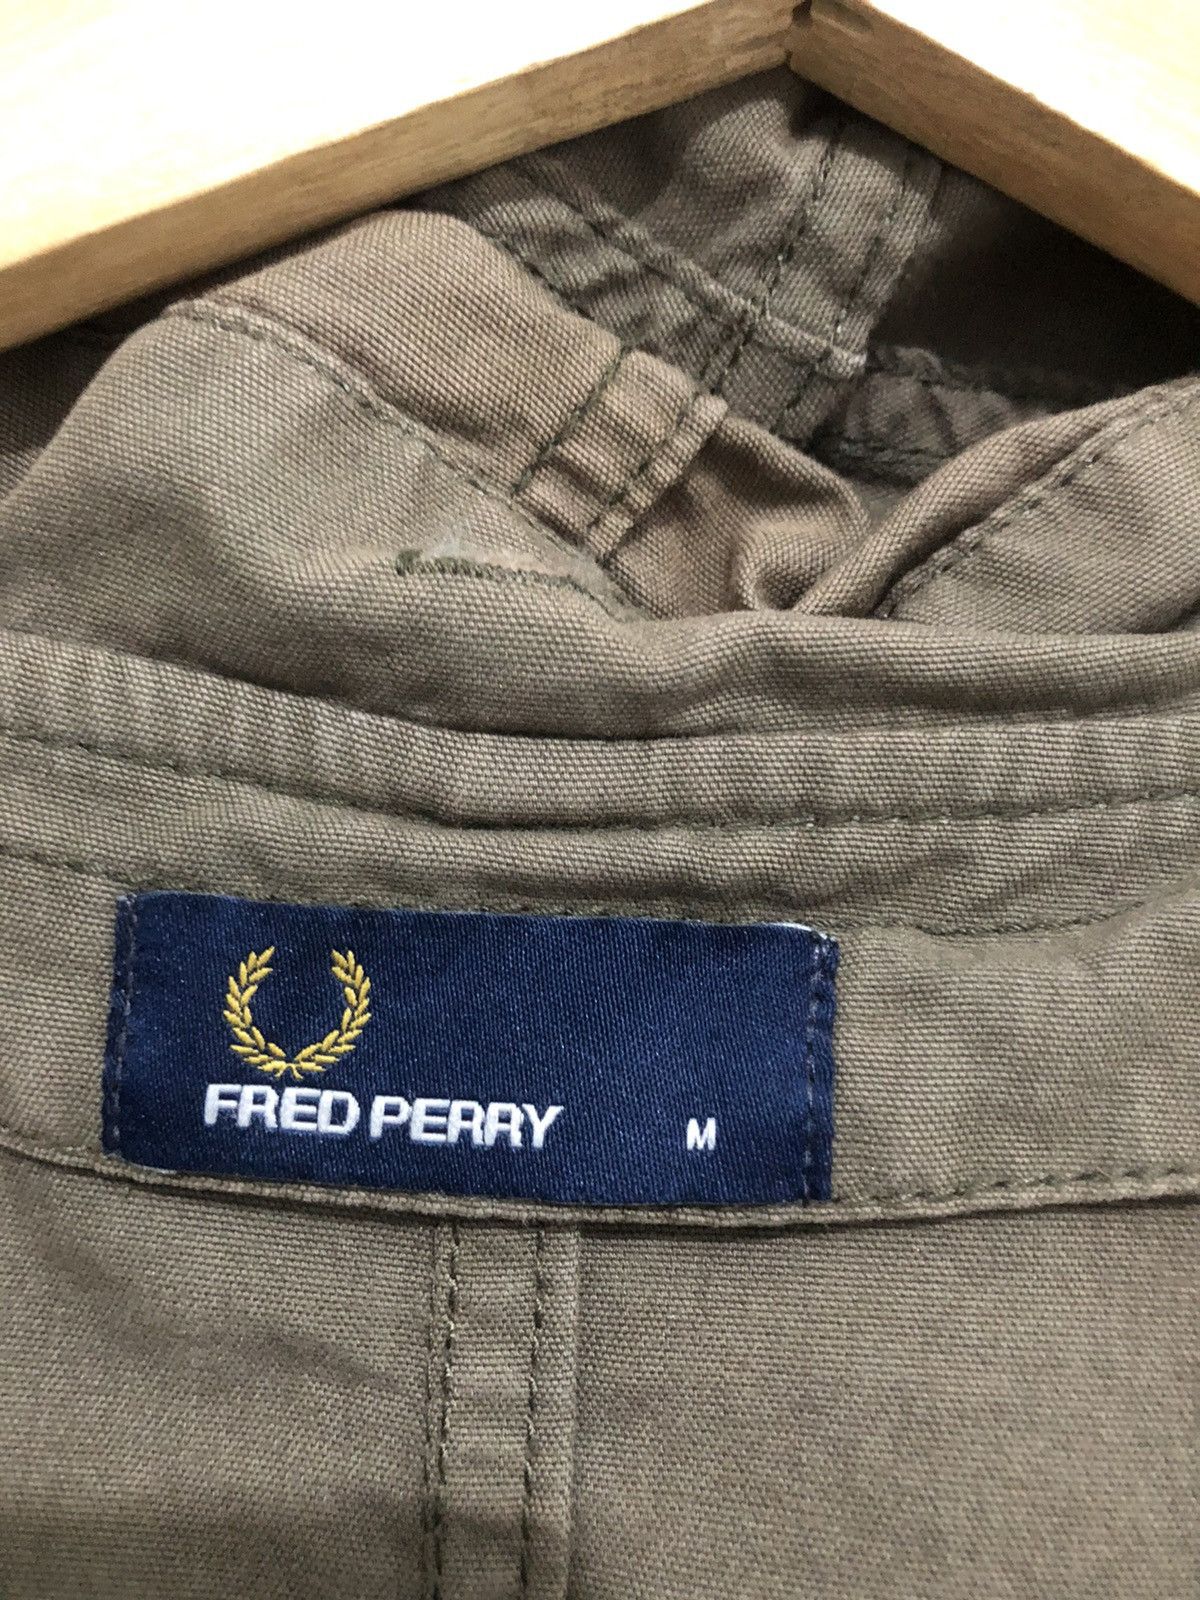 Fred Perry Military Fishtail Jacket - 8